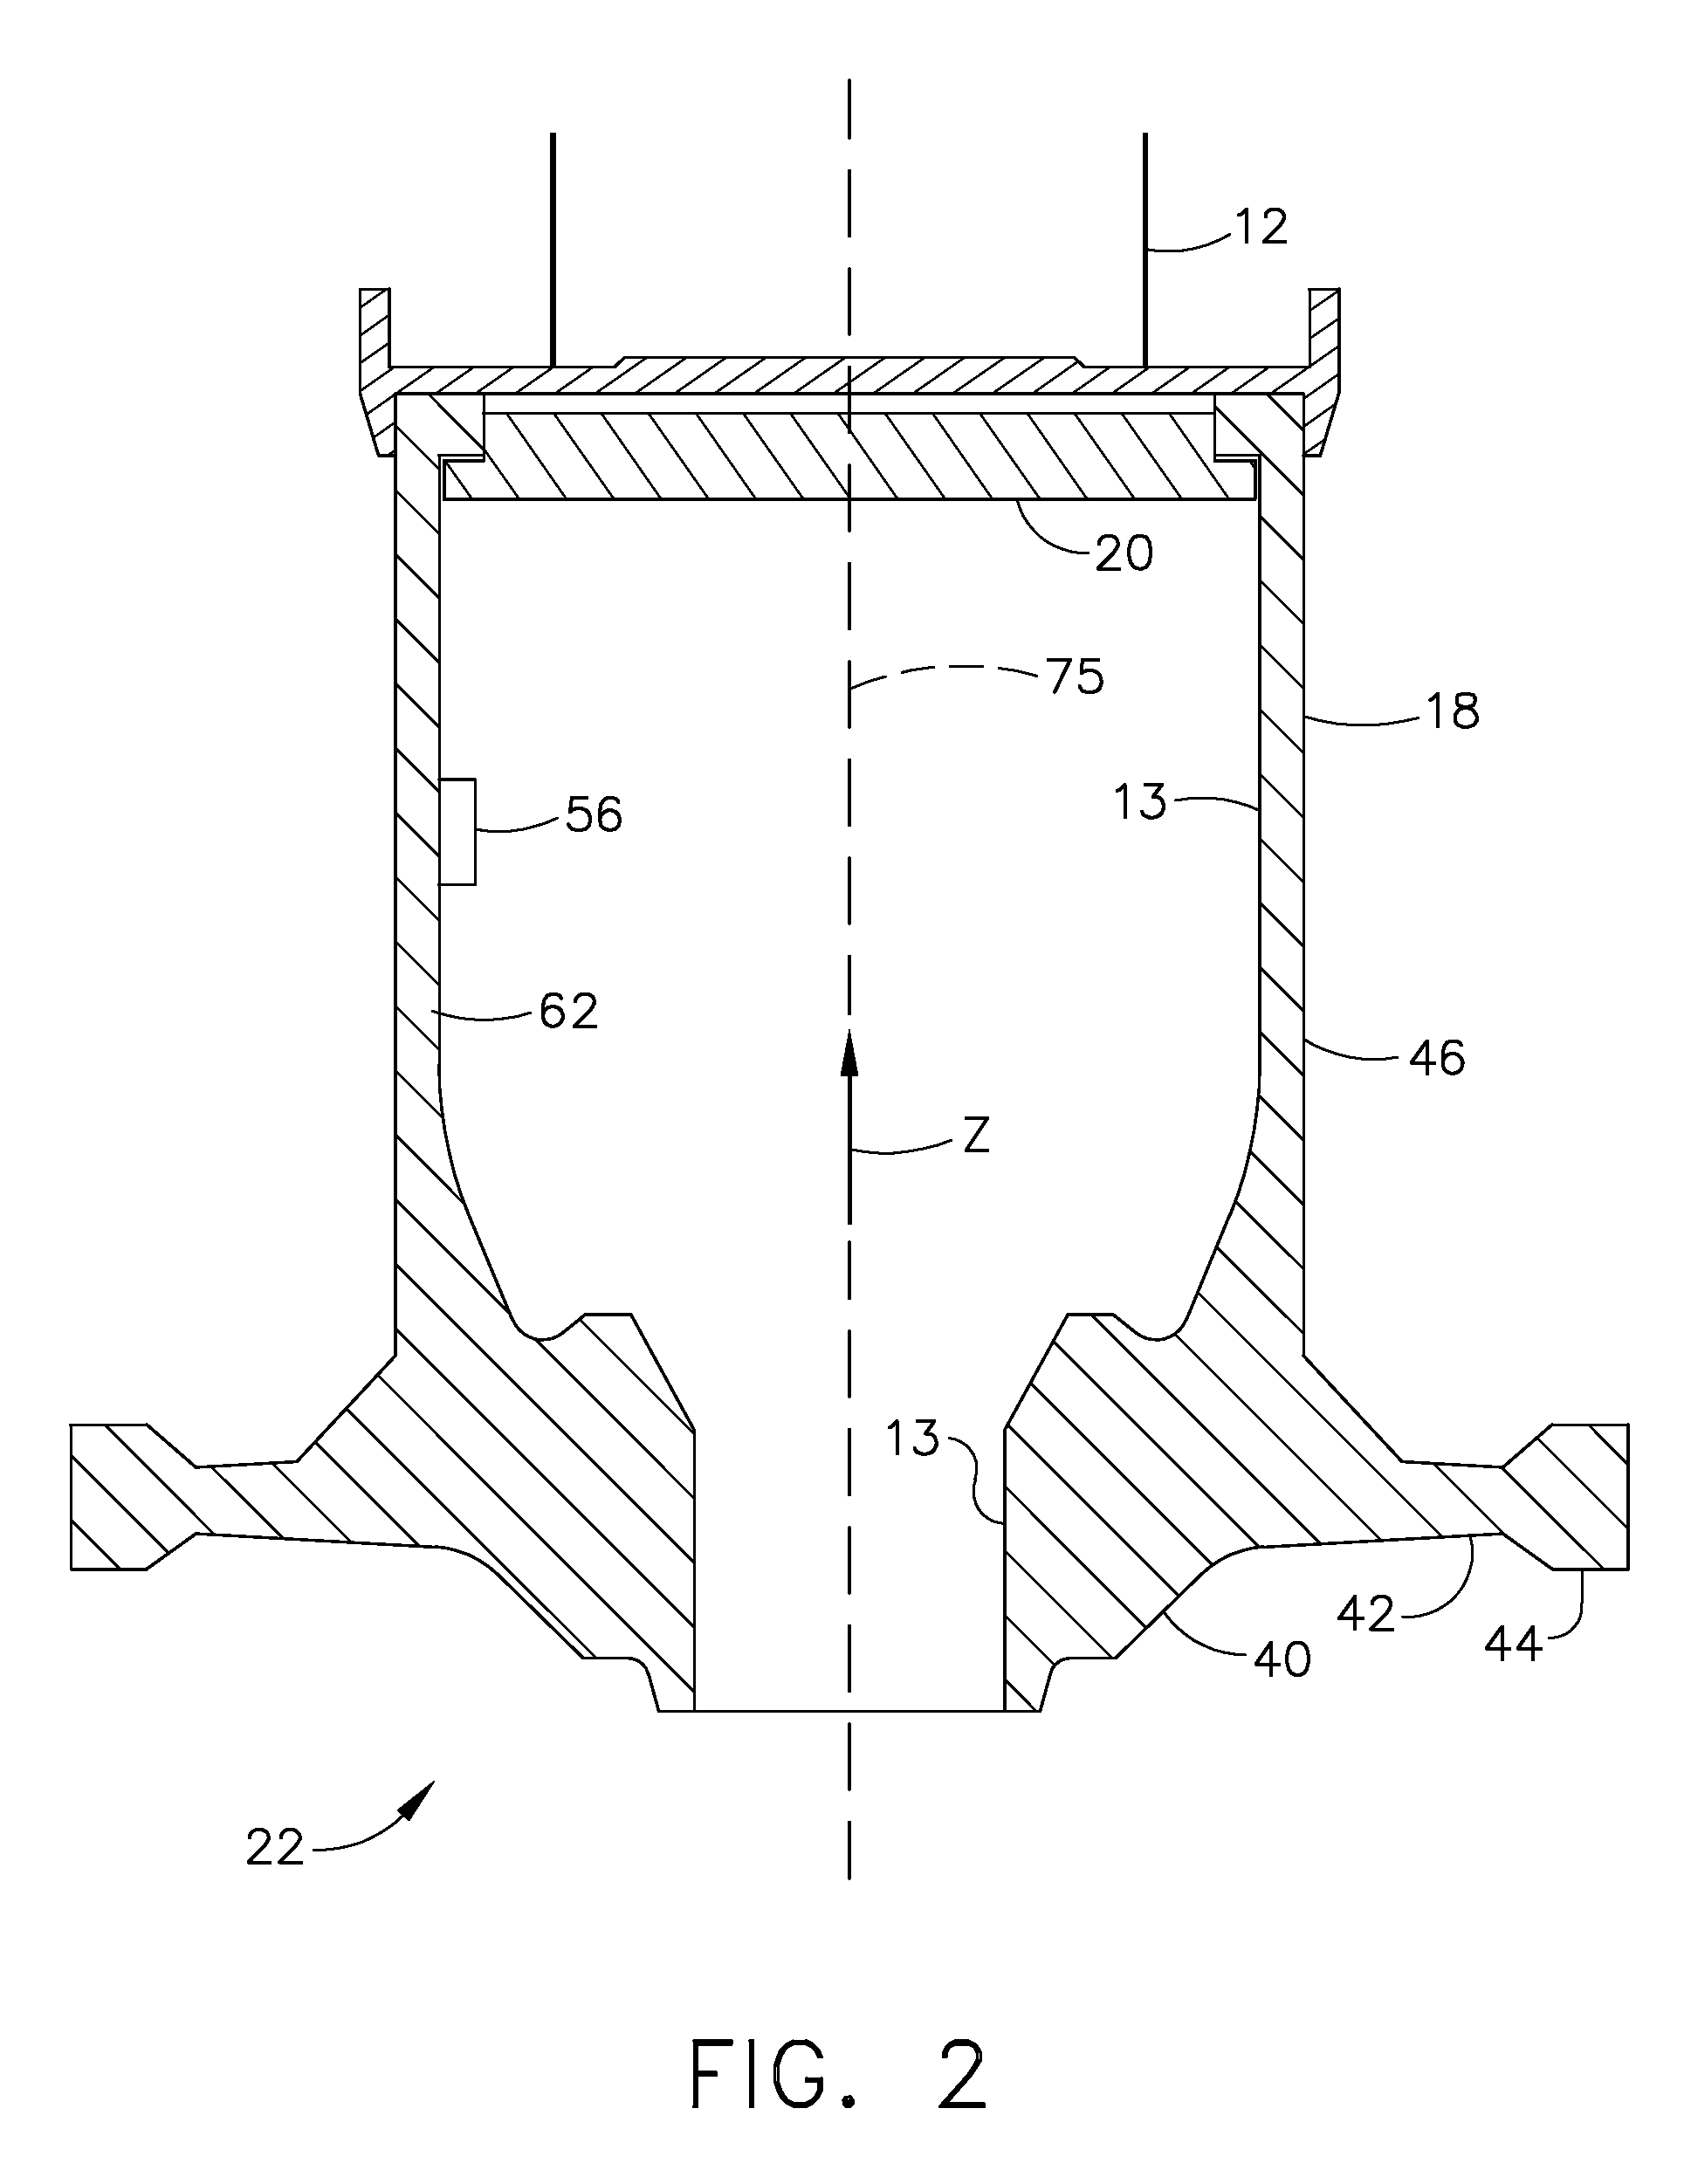 Method and apparatus for pre-spinning rotor forgings